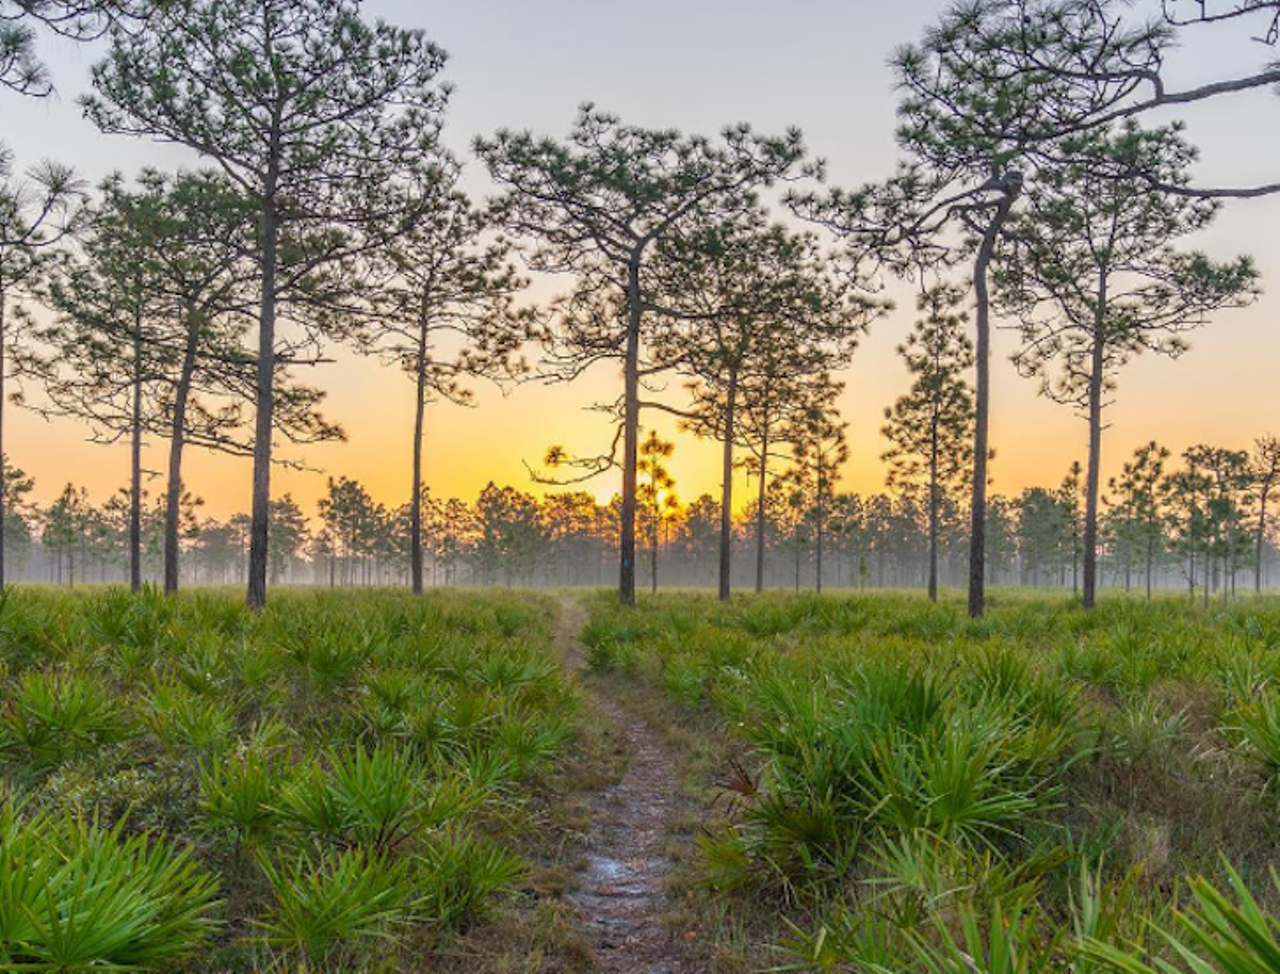 Triple N Ranch
Callahan, FL 32011
This rugged, but well-marked path takes you through 7-miles of open pine savanna and cypress domes. But it&#146;s also a hunting preserve, so make sure you check the website before you head out into potentially more dangerous wilderness.  
Photo via steven.wood.1213/Instagram